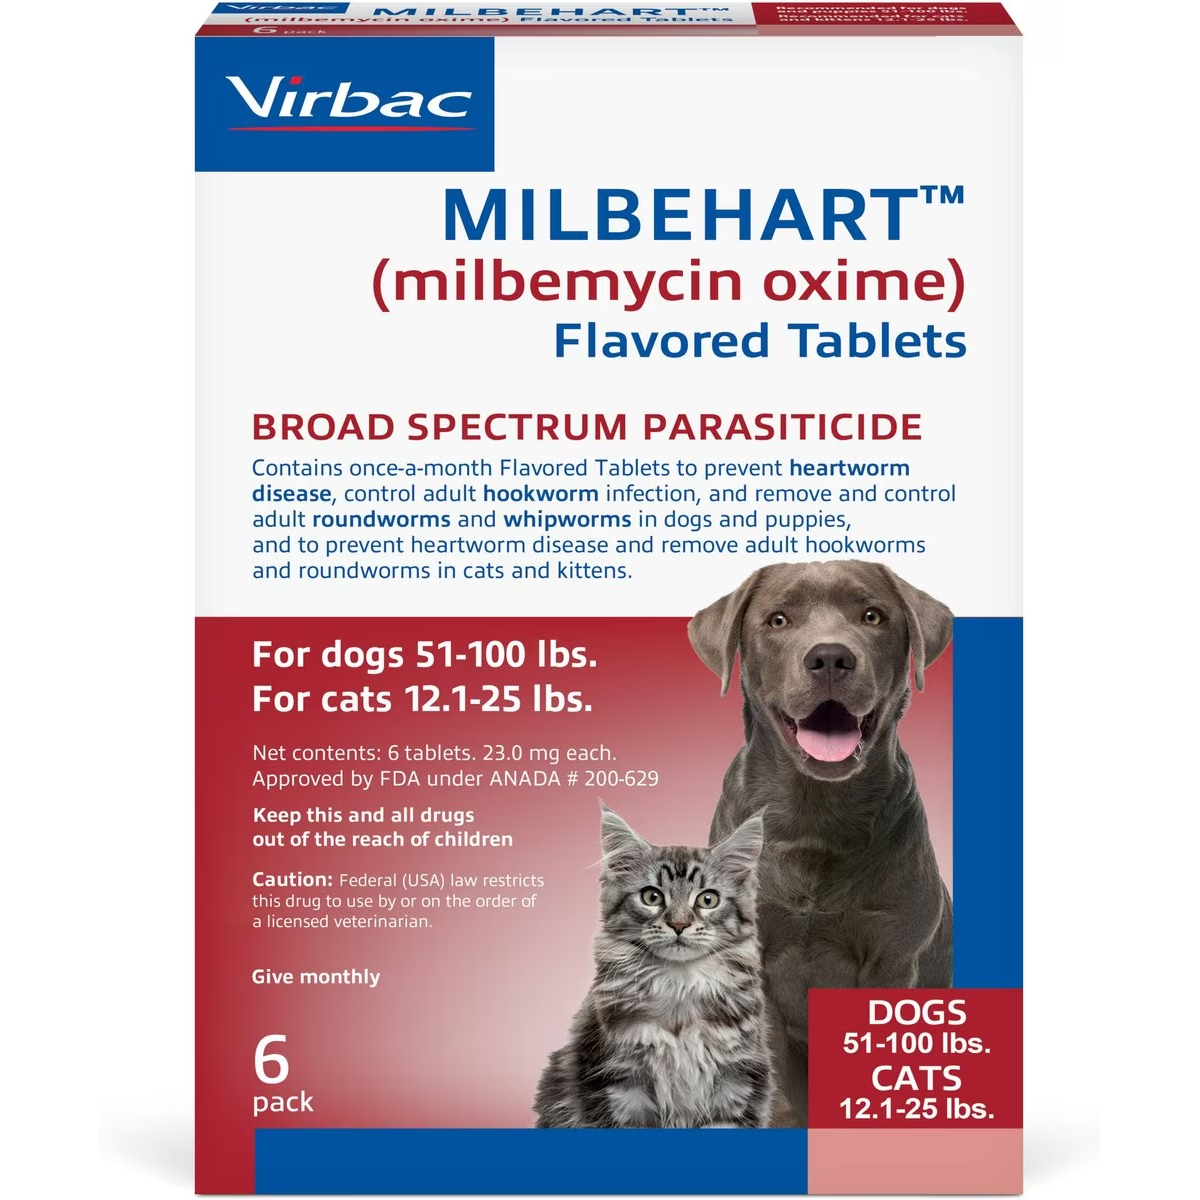 Milbehart Flavored Tablets for Dogs